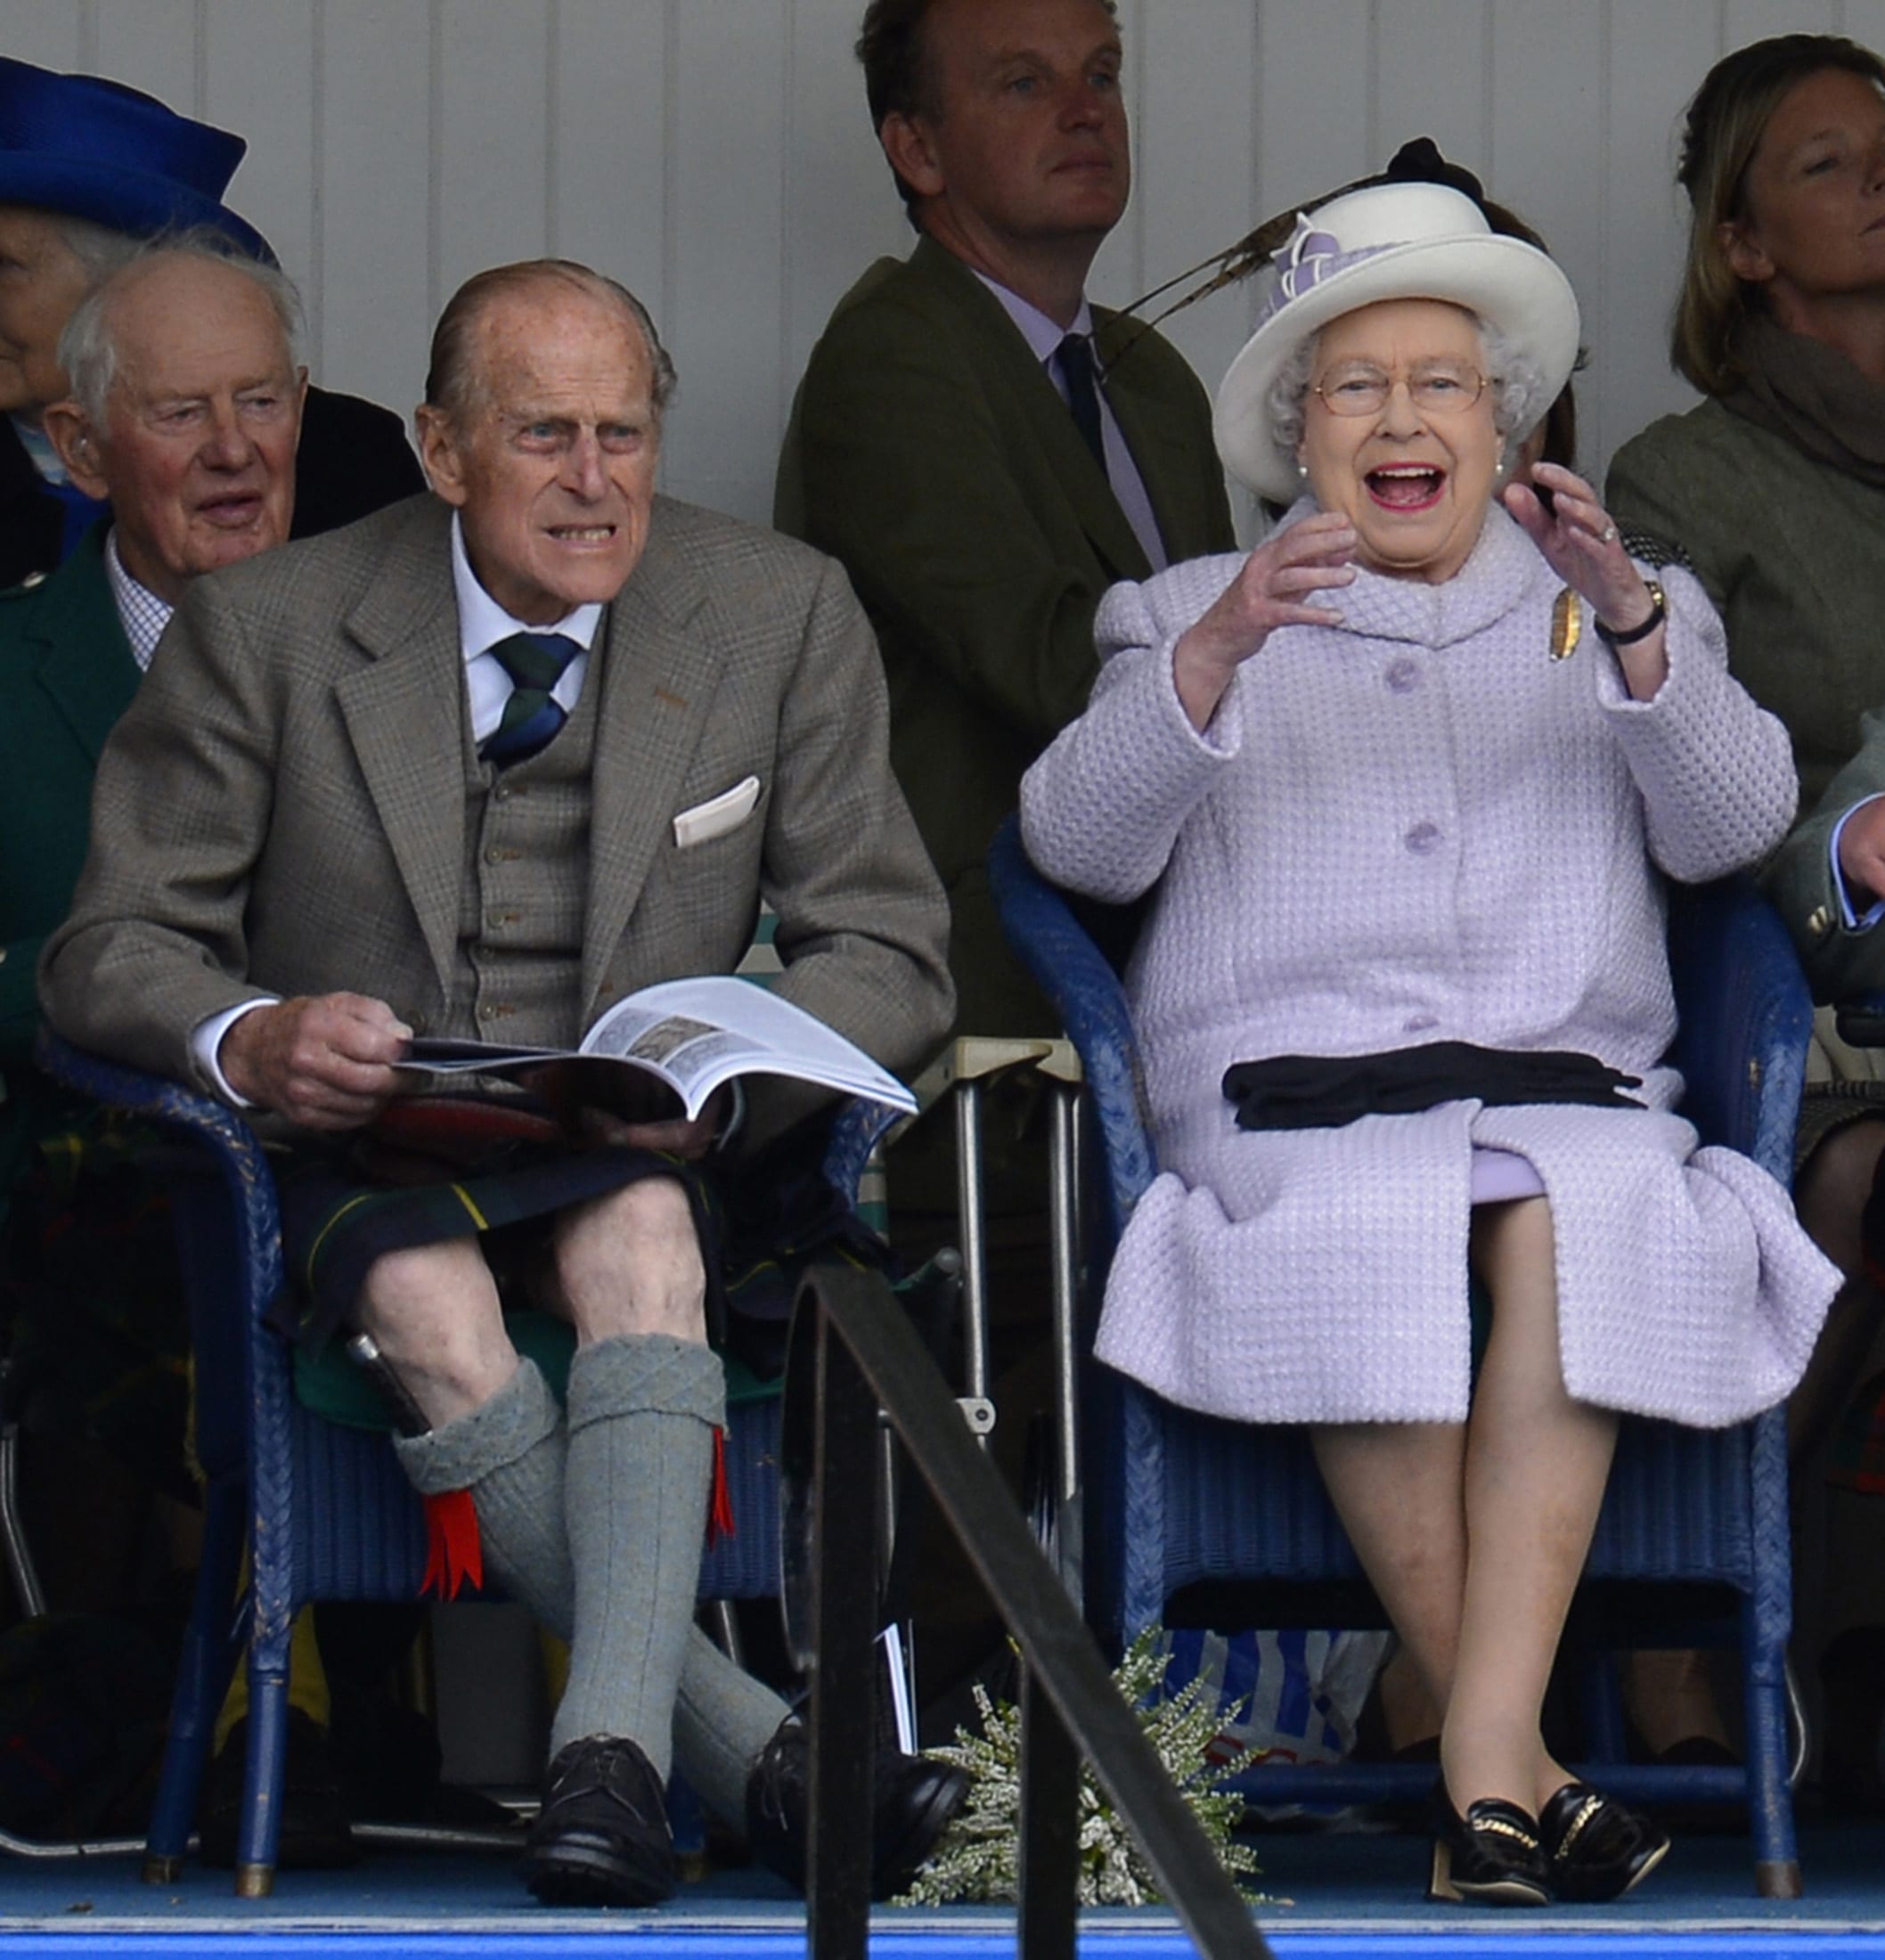 Members of Britain's royal family (front L-R) Prince Philip and Queen Elizabeth cheer as competitors participate in a sack race at the Braemar Gathering in Braemar, Scotland September 1, 2012. REUTERS